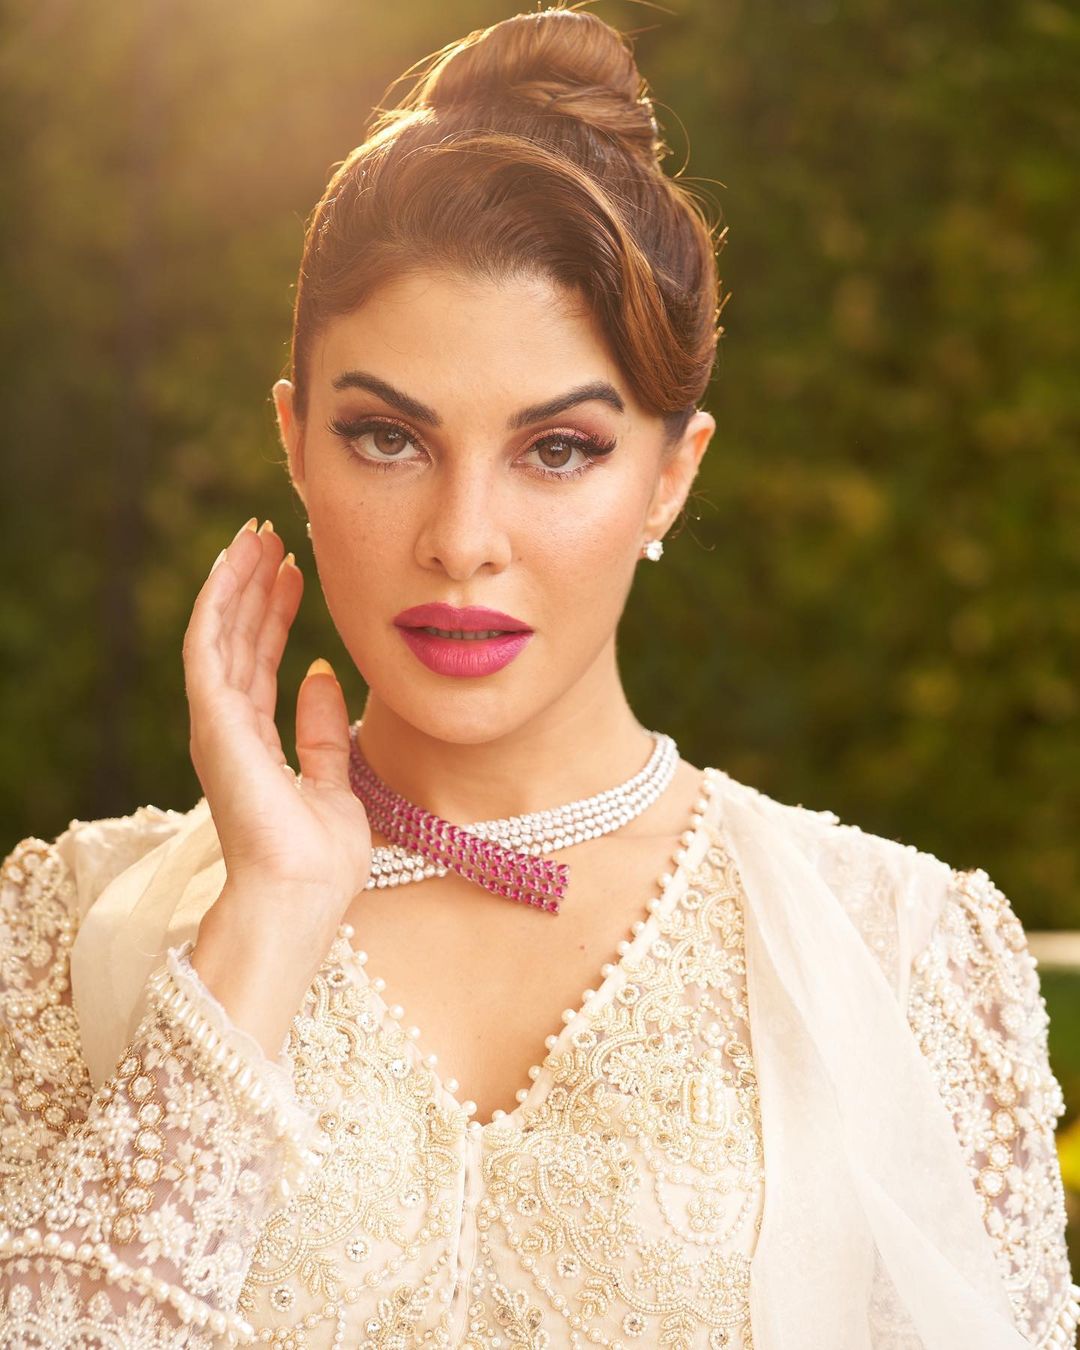 Jacqueline Fernandez looks drop-dead gorgeous in the ivory white look with the statement neckpiece.